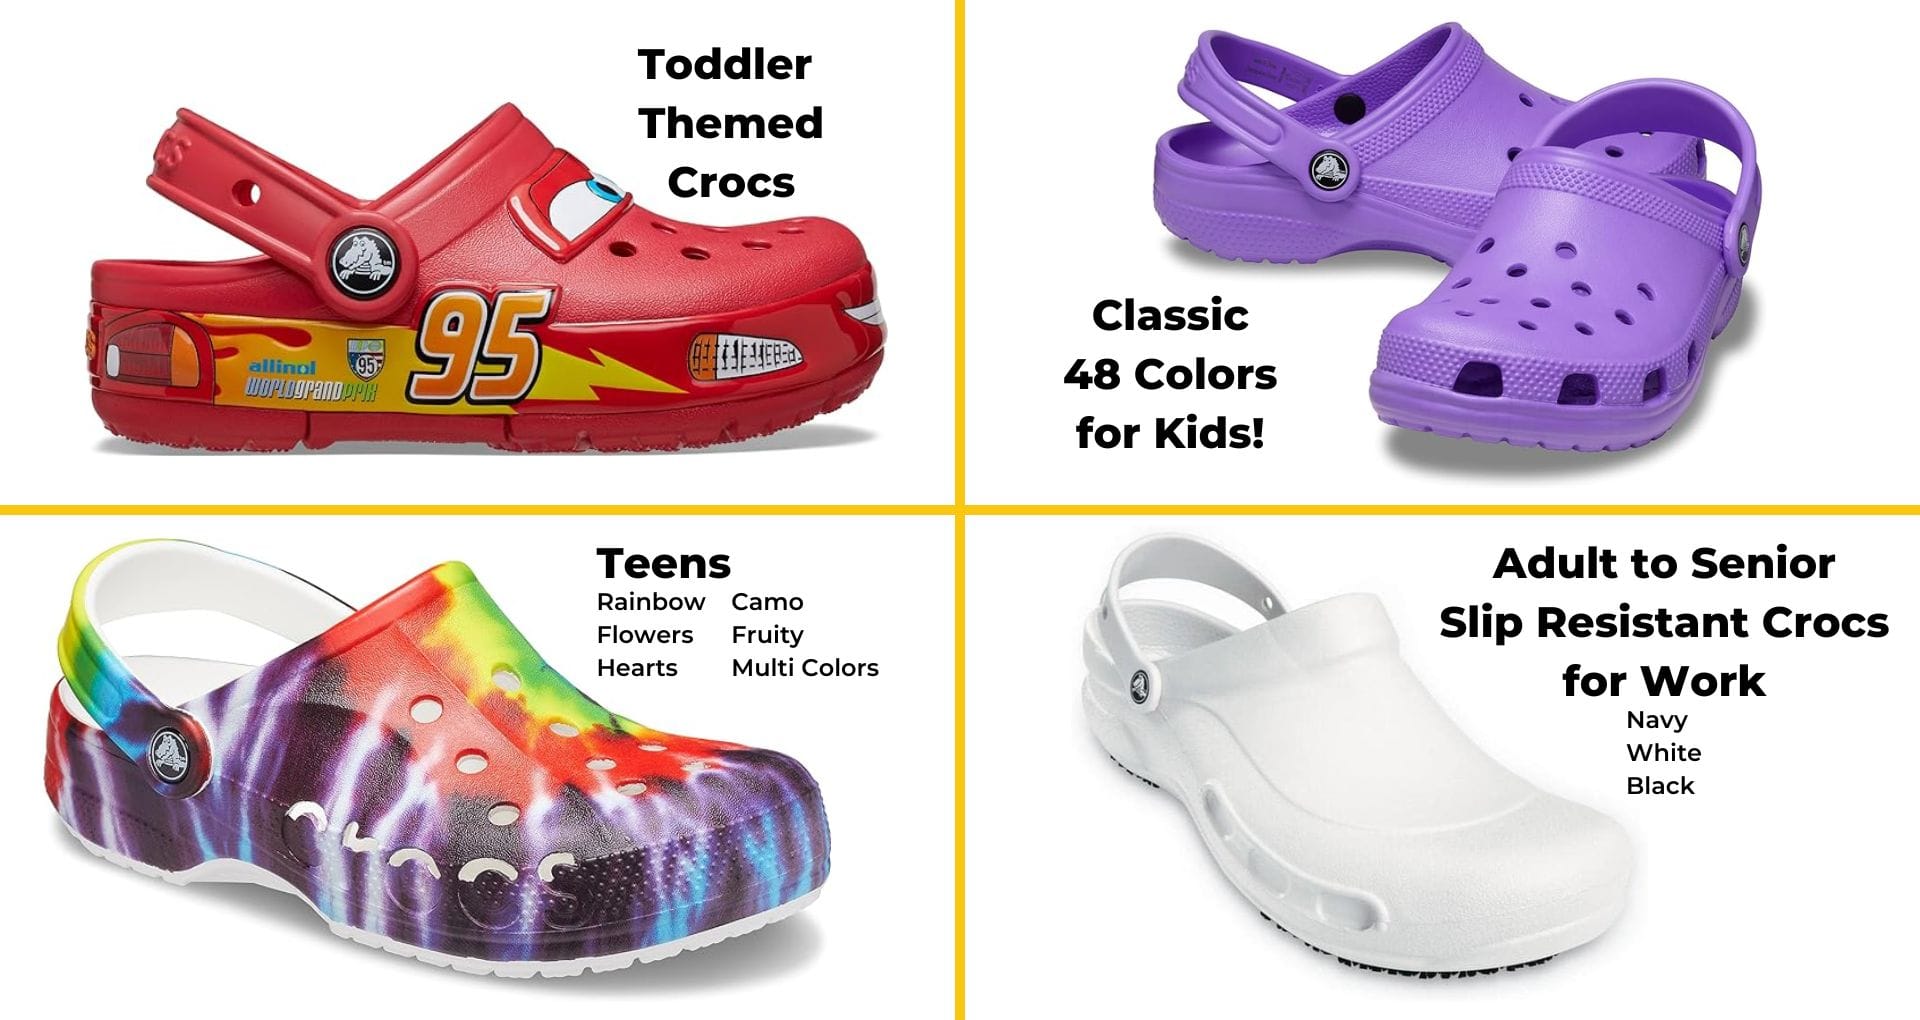 Crocs for toddlers, kids, teens, adults at work and seniors.